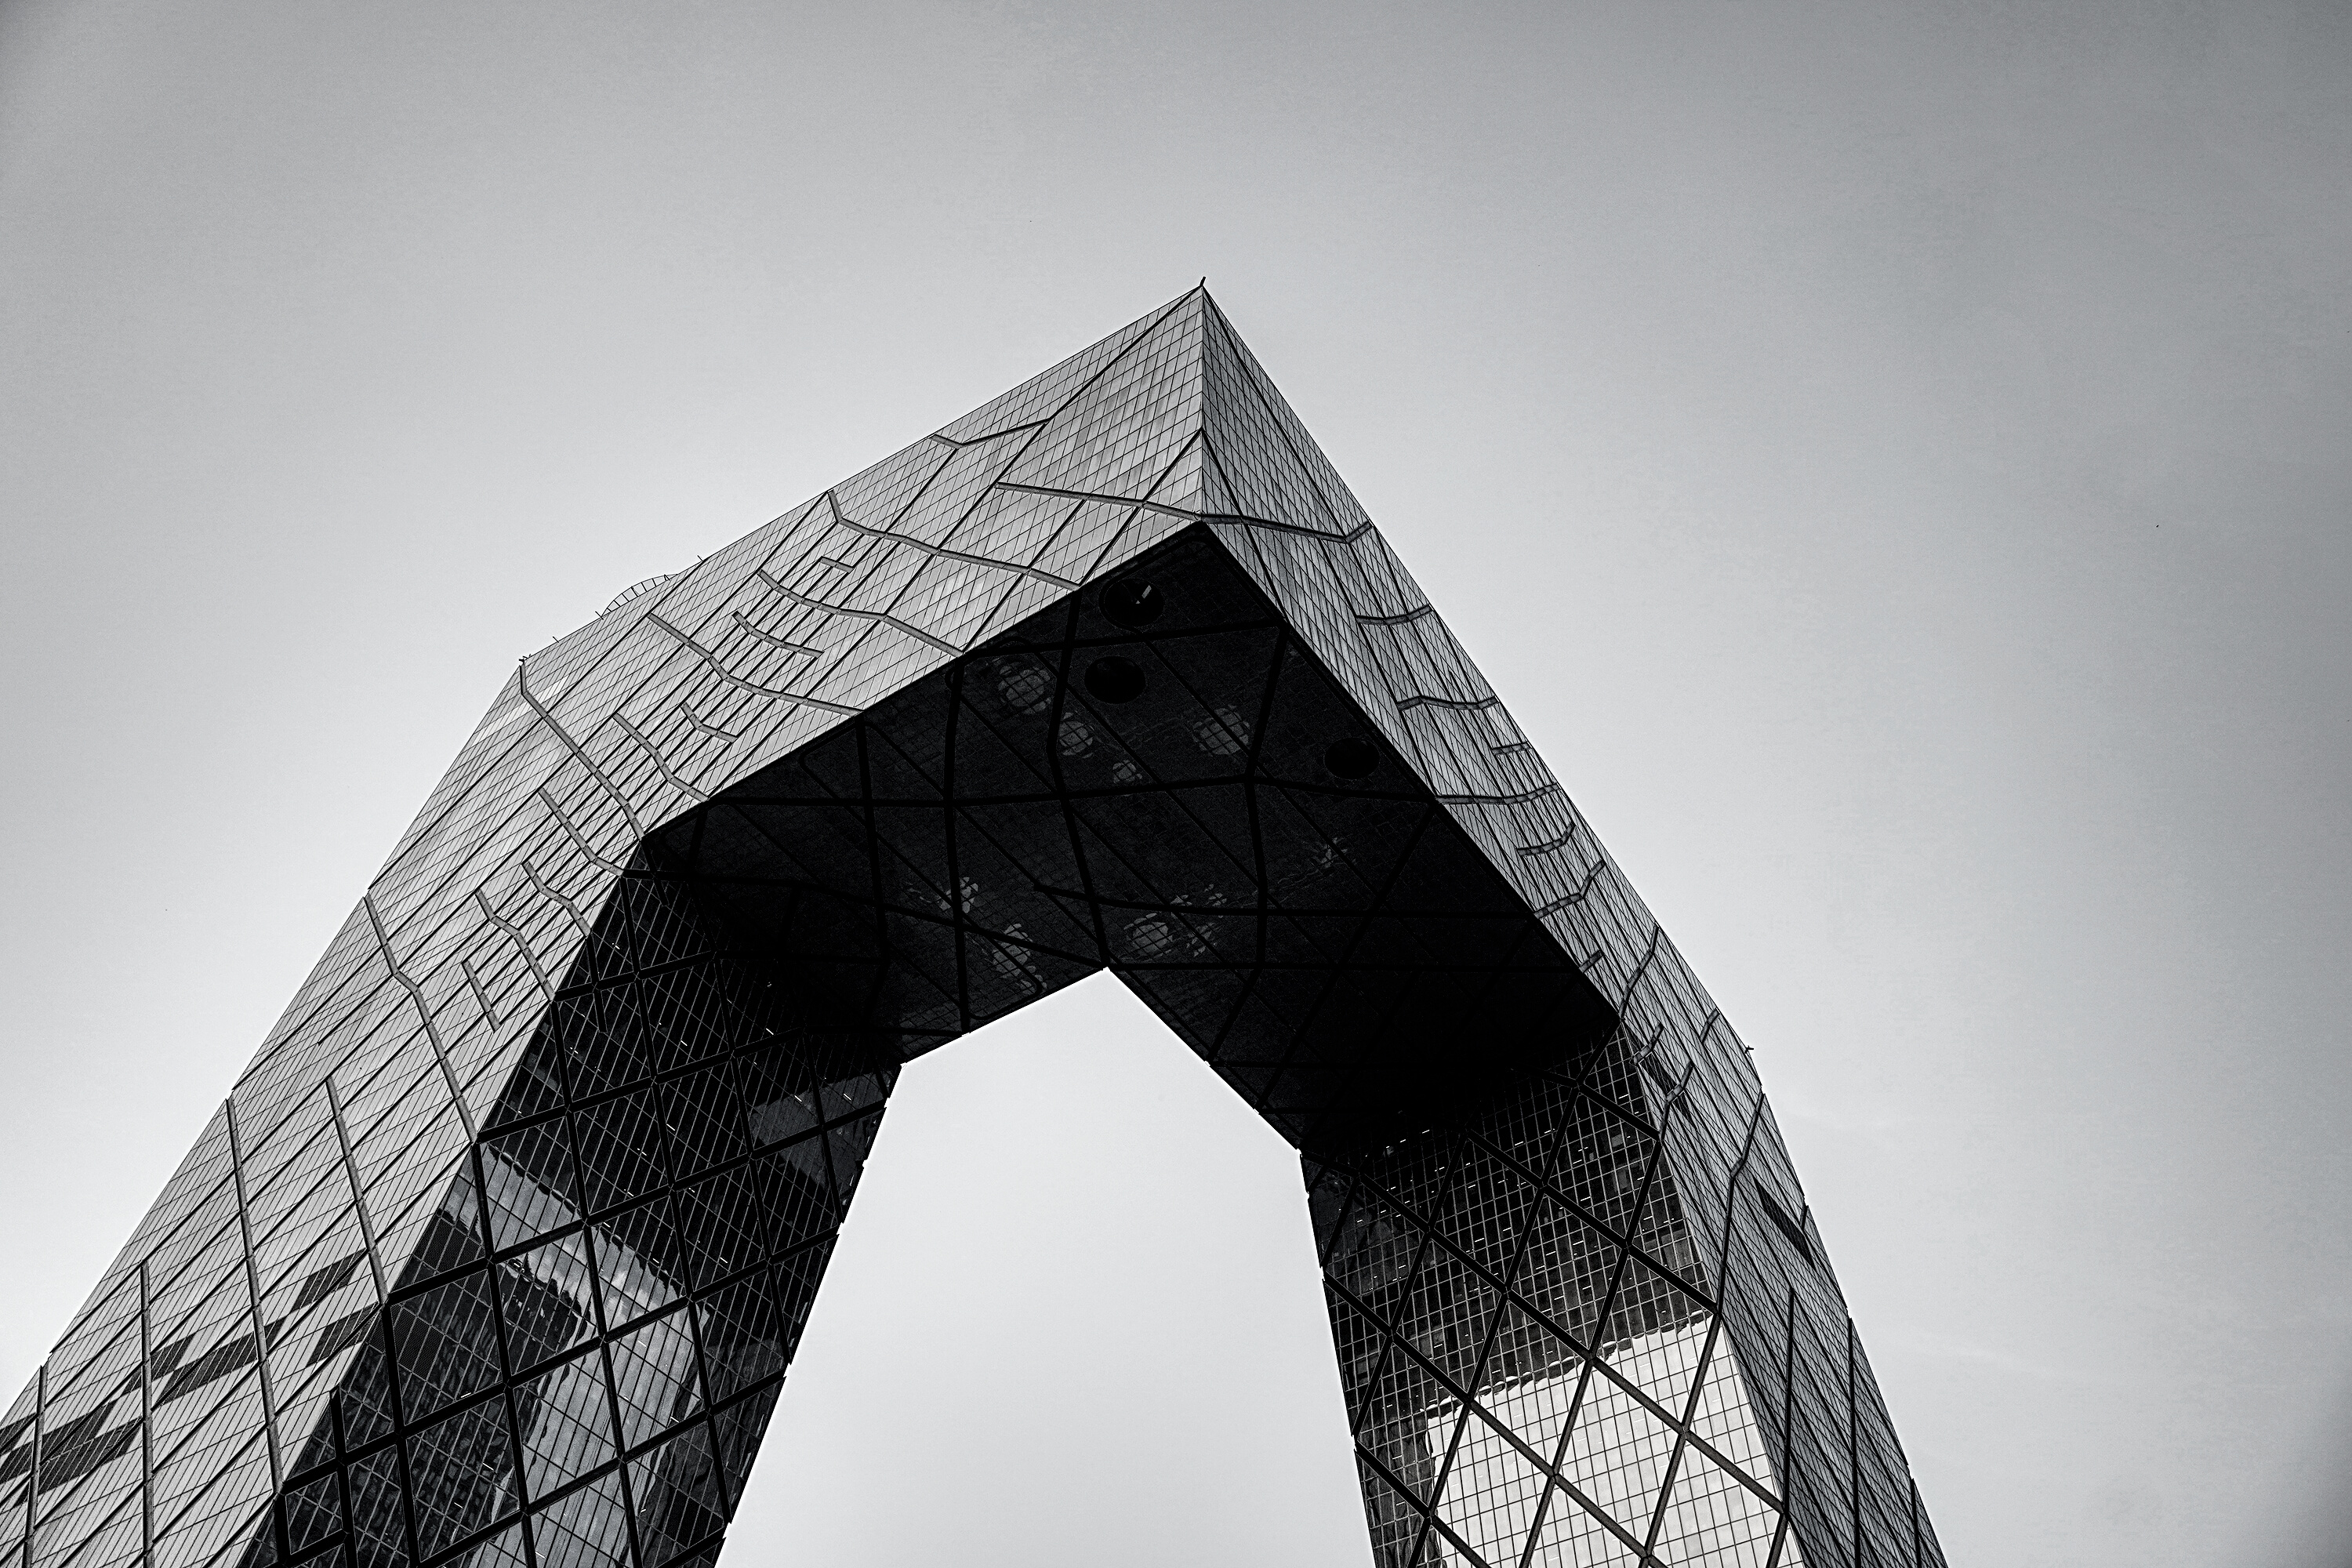 Low Angle Shot of the CCTV Headquarters in China